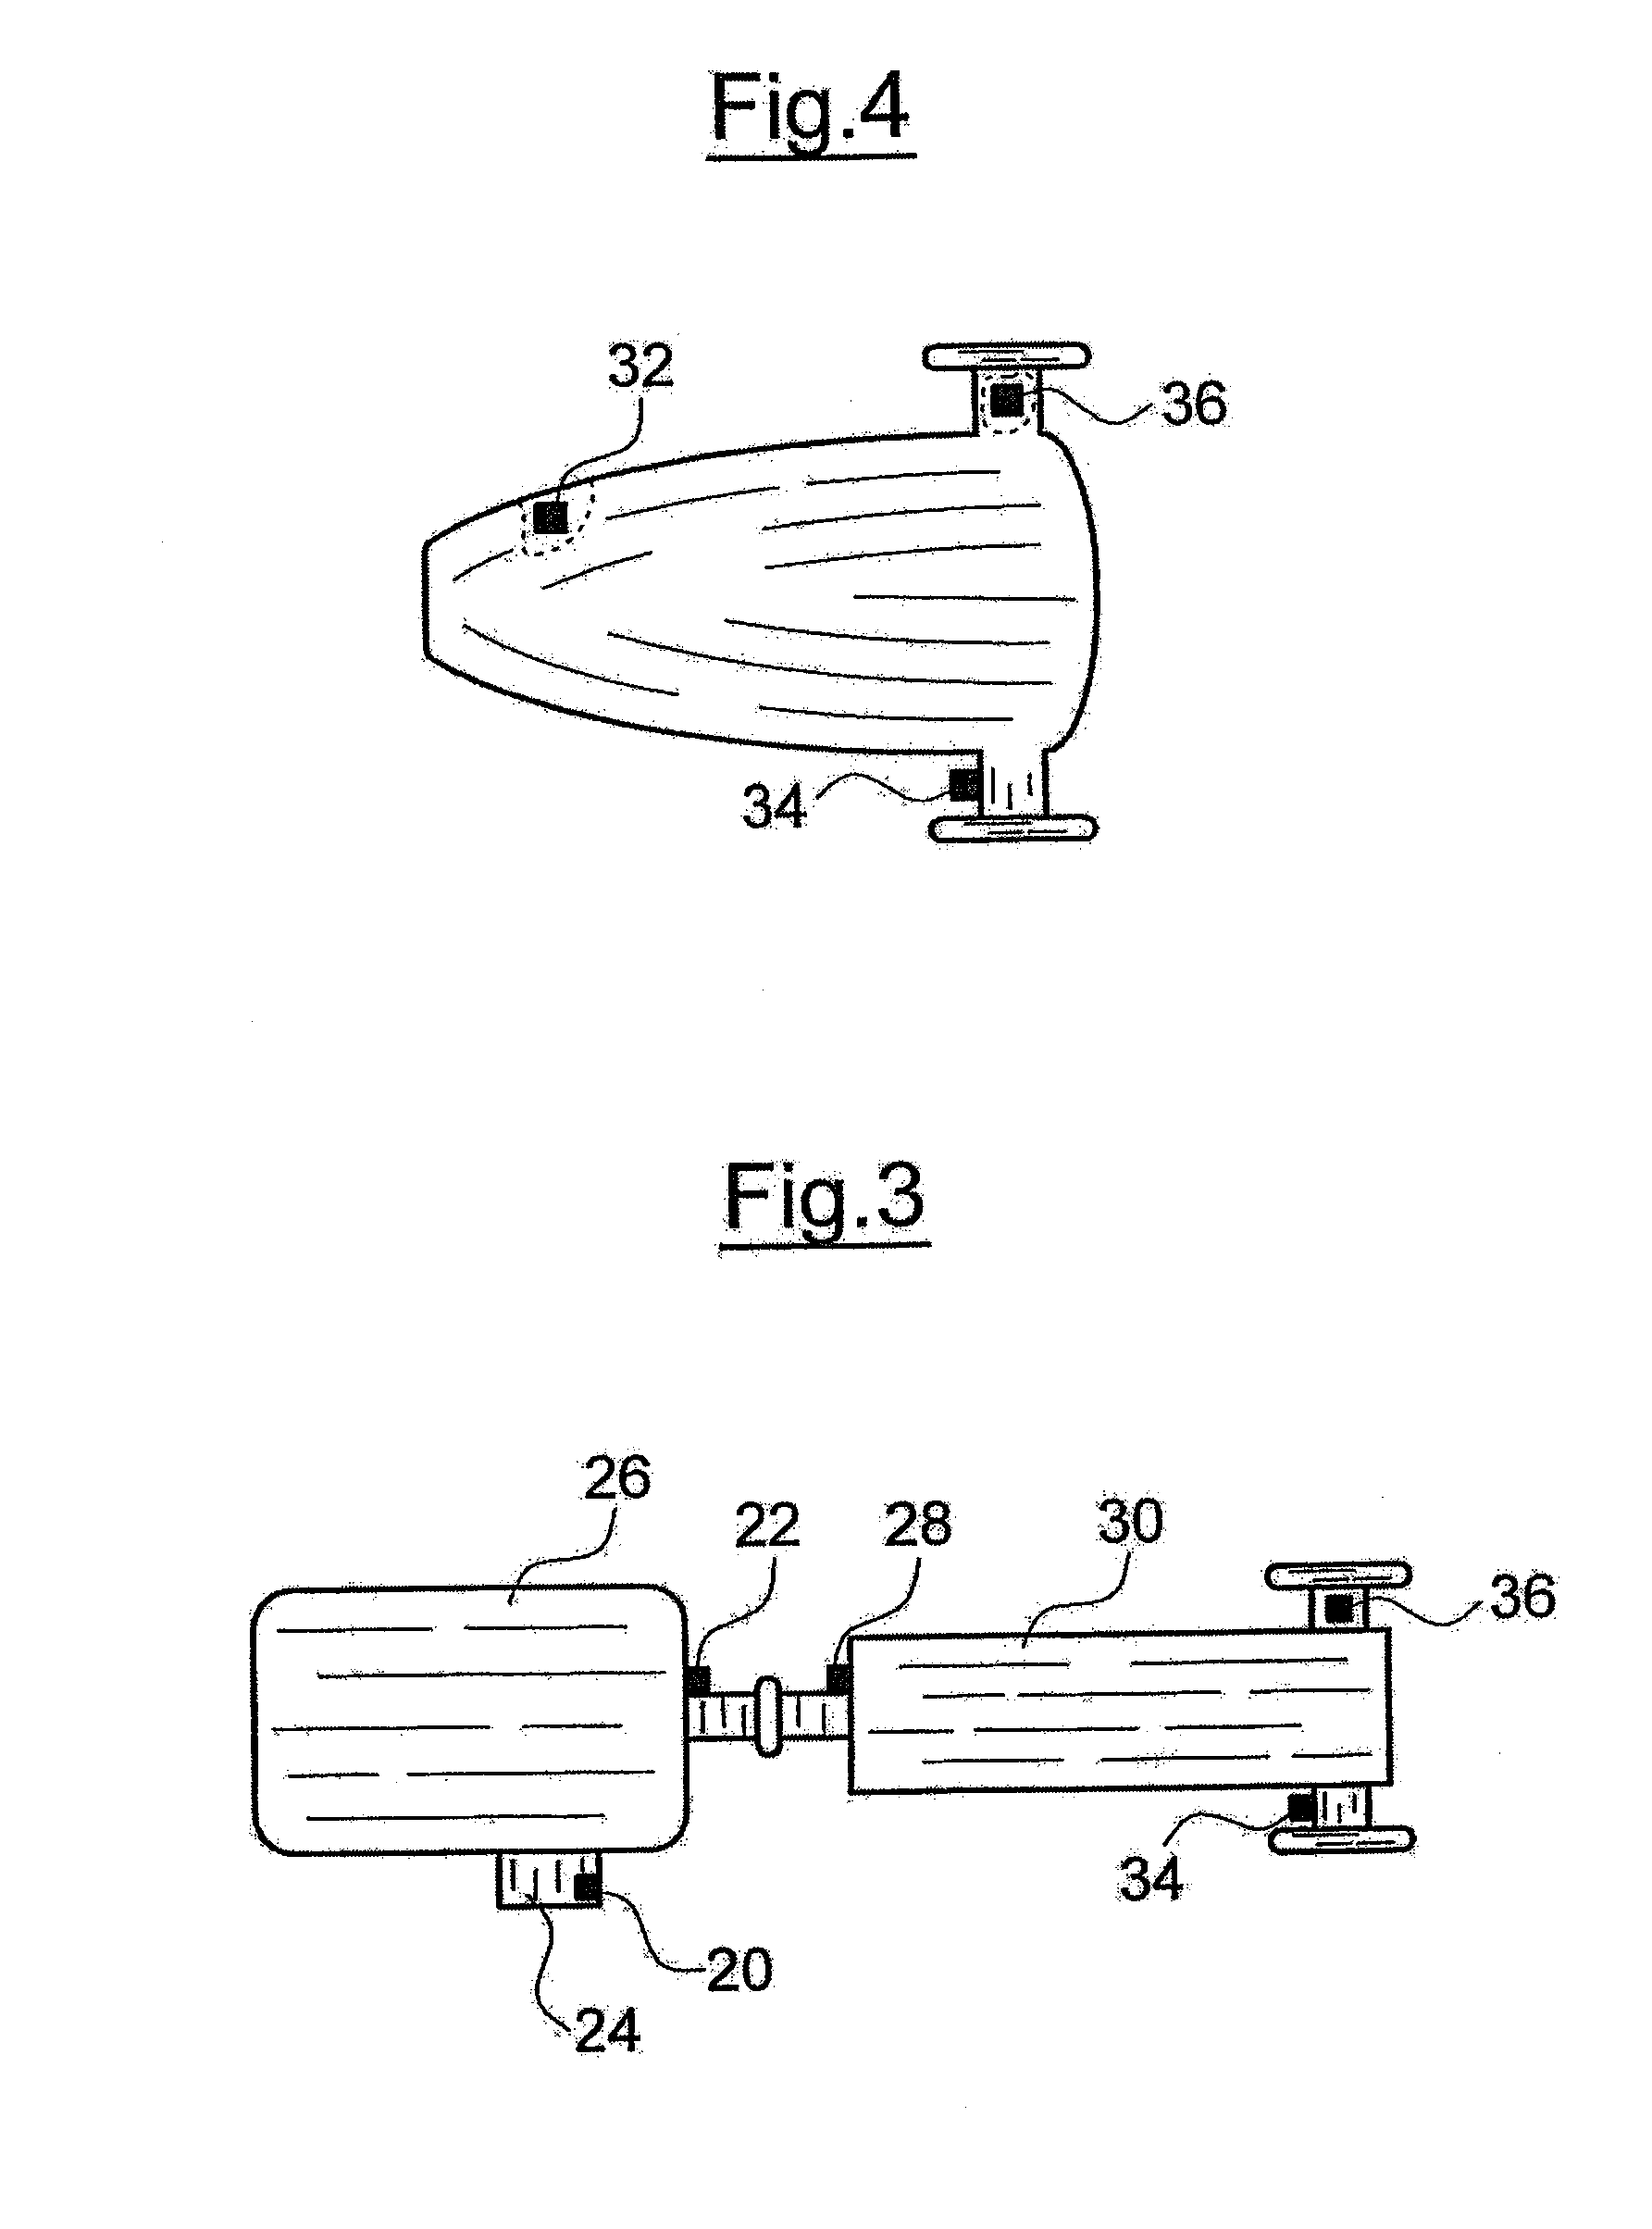 Method for the Detection of Errors in Pump Units